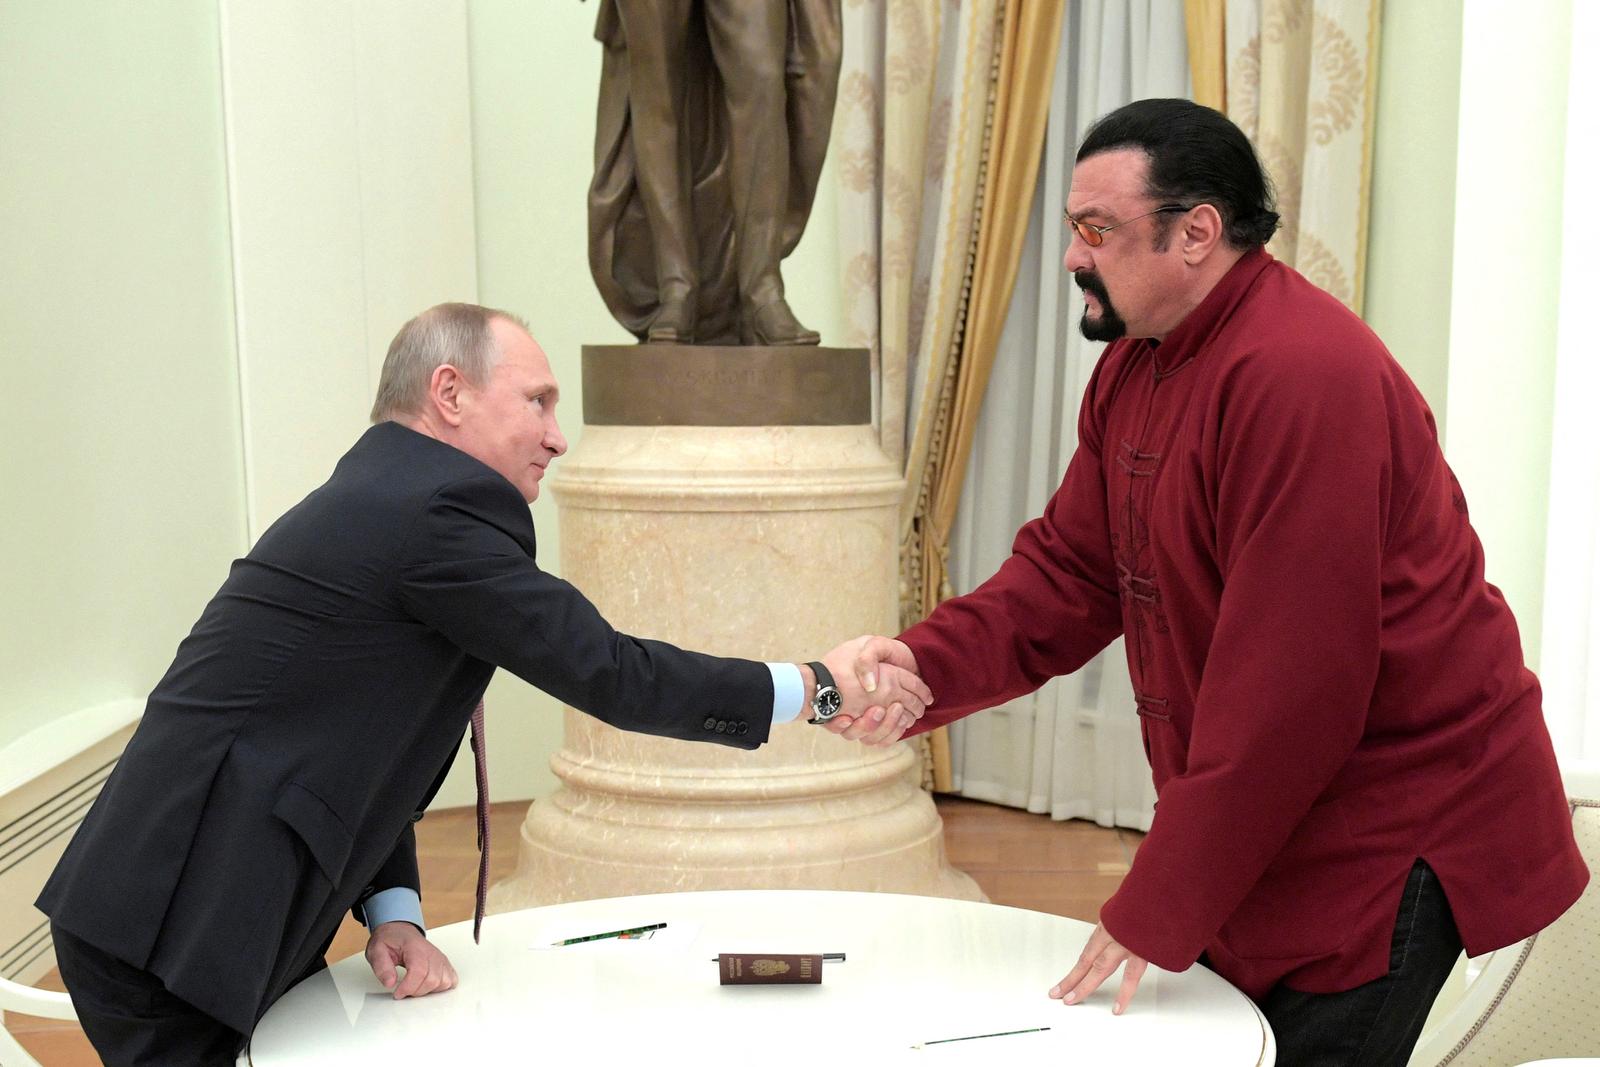 FILE PHOTO: Russia's President Vladimir Putin (L) shakes hands with U.S. actor Steven Seagal during a meeting at the Kremlin in Moscow, Russia, November 25, 2016. Sputnik/Kremlin/Alexei Druzhinin via REUTERS. ATTENTION EDITORS - THIS IMAGE WAS PROVIDED BY A THIRD PARTY. EDITORIAL USE ONLY./File Photo Photo: Sputnik Photo Agency/REUTERS